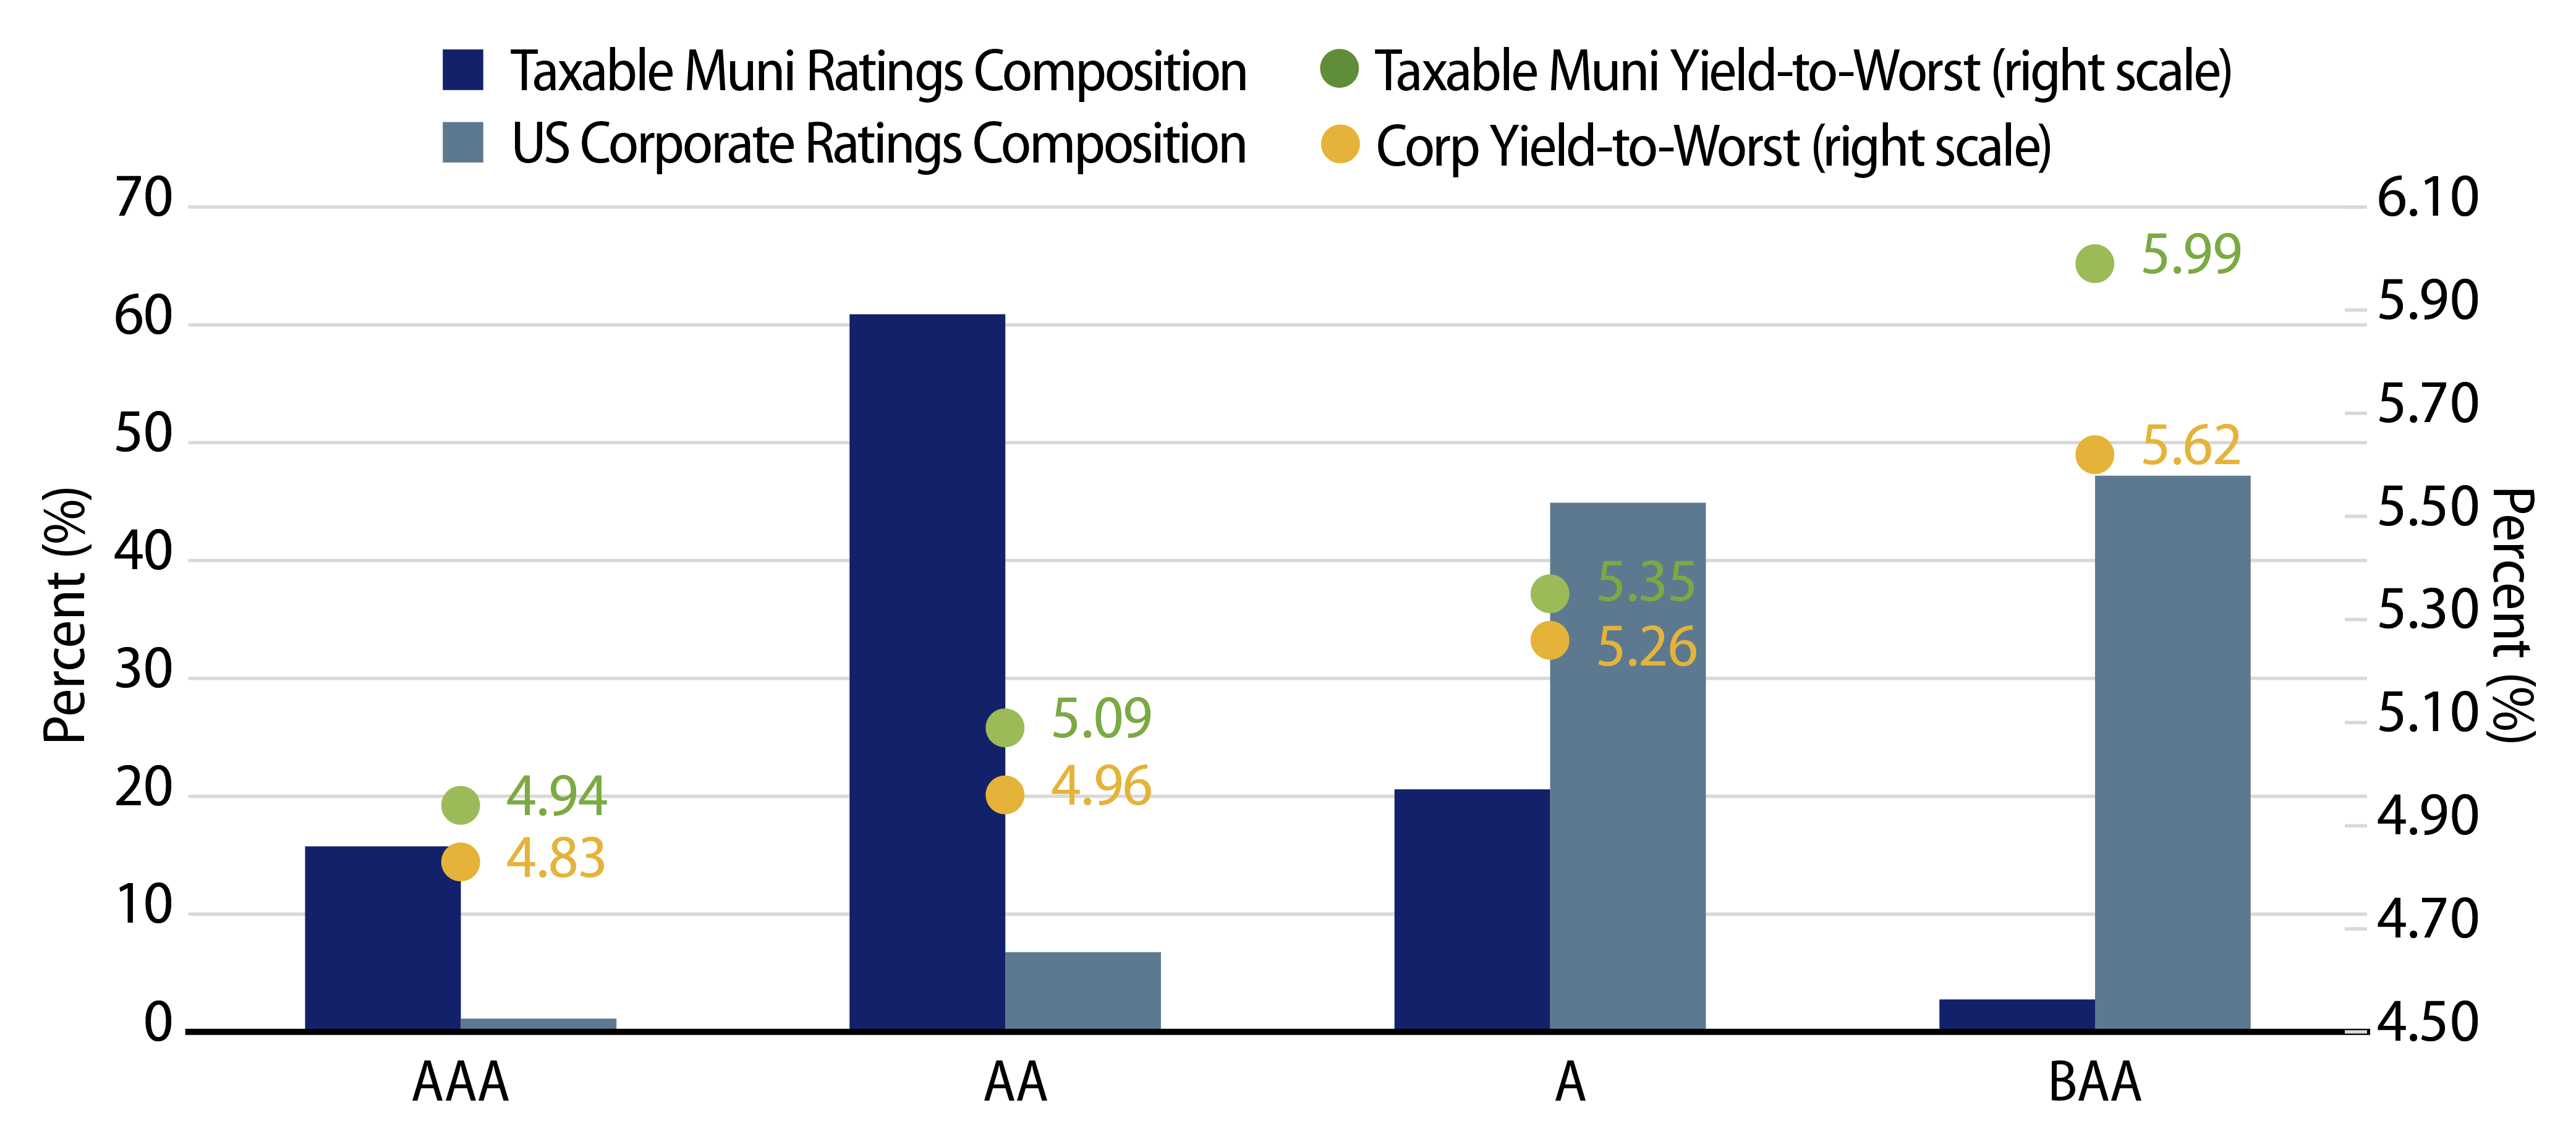 Taxable Munis vs. Corporate Index Credit Compositions and Yields